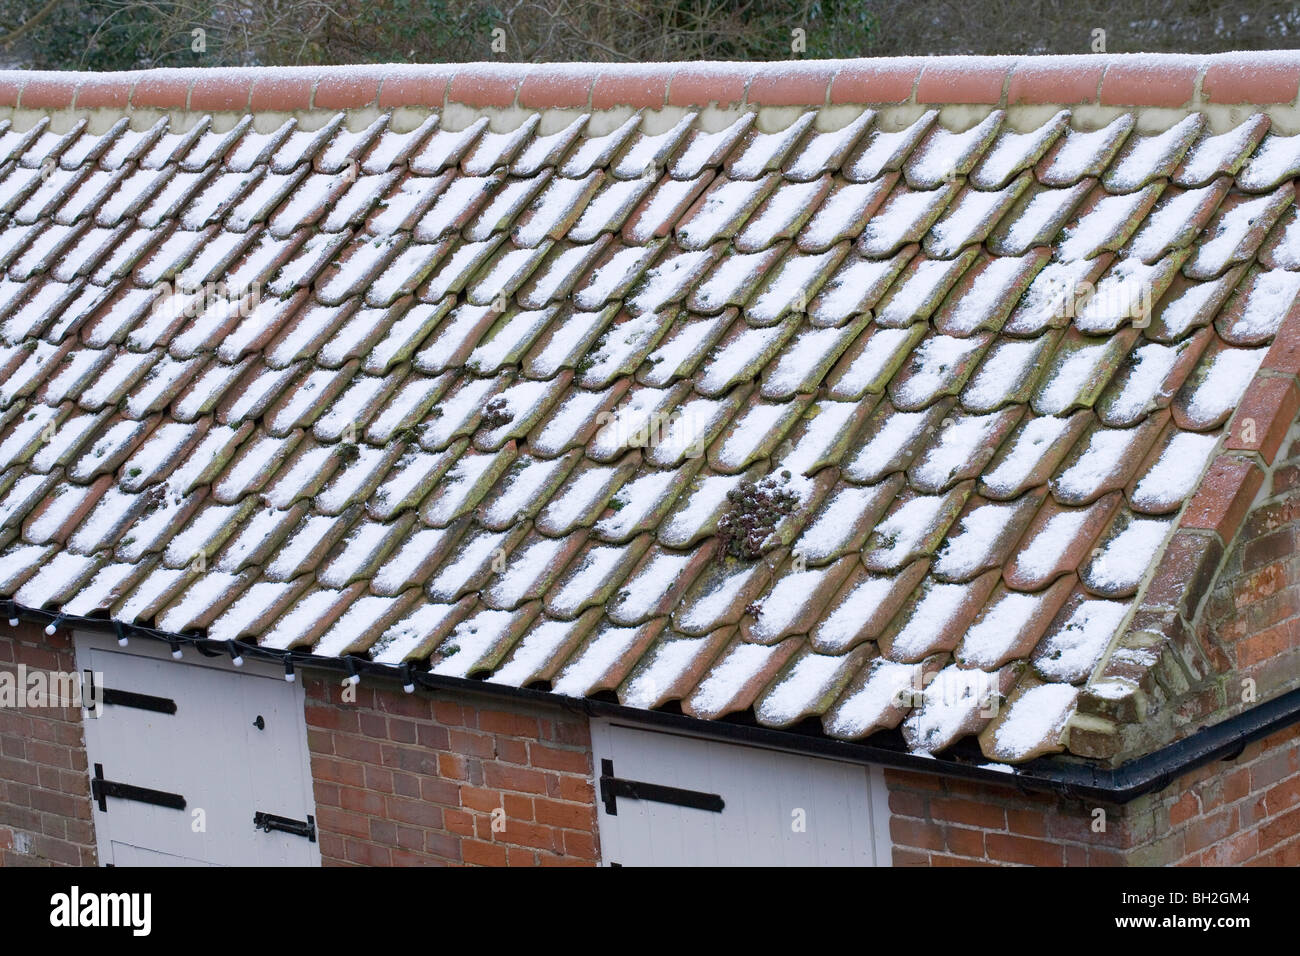 Snow and hail stones on Pantile roof of an outbuilding. Stock Photo